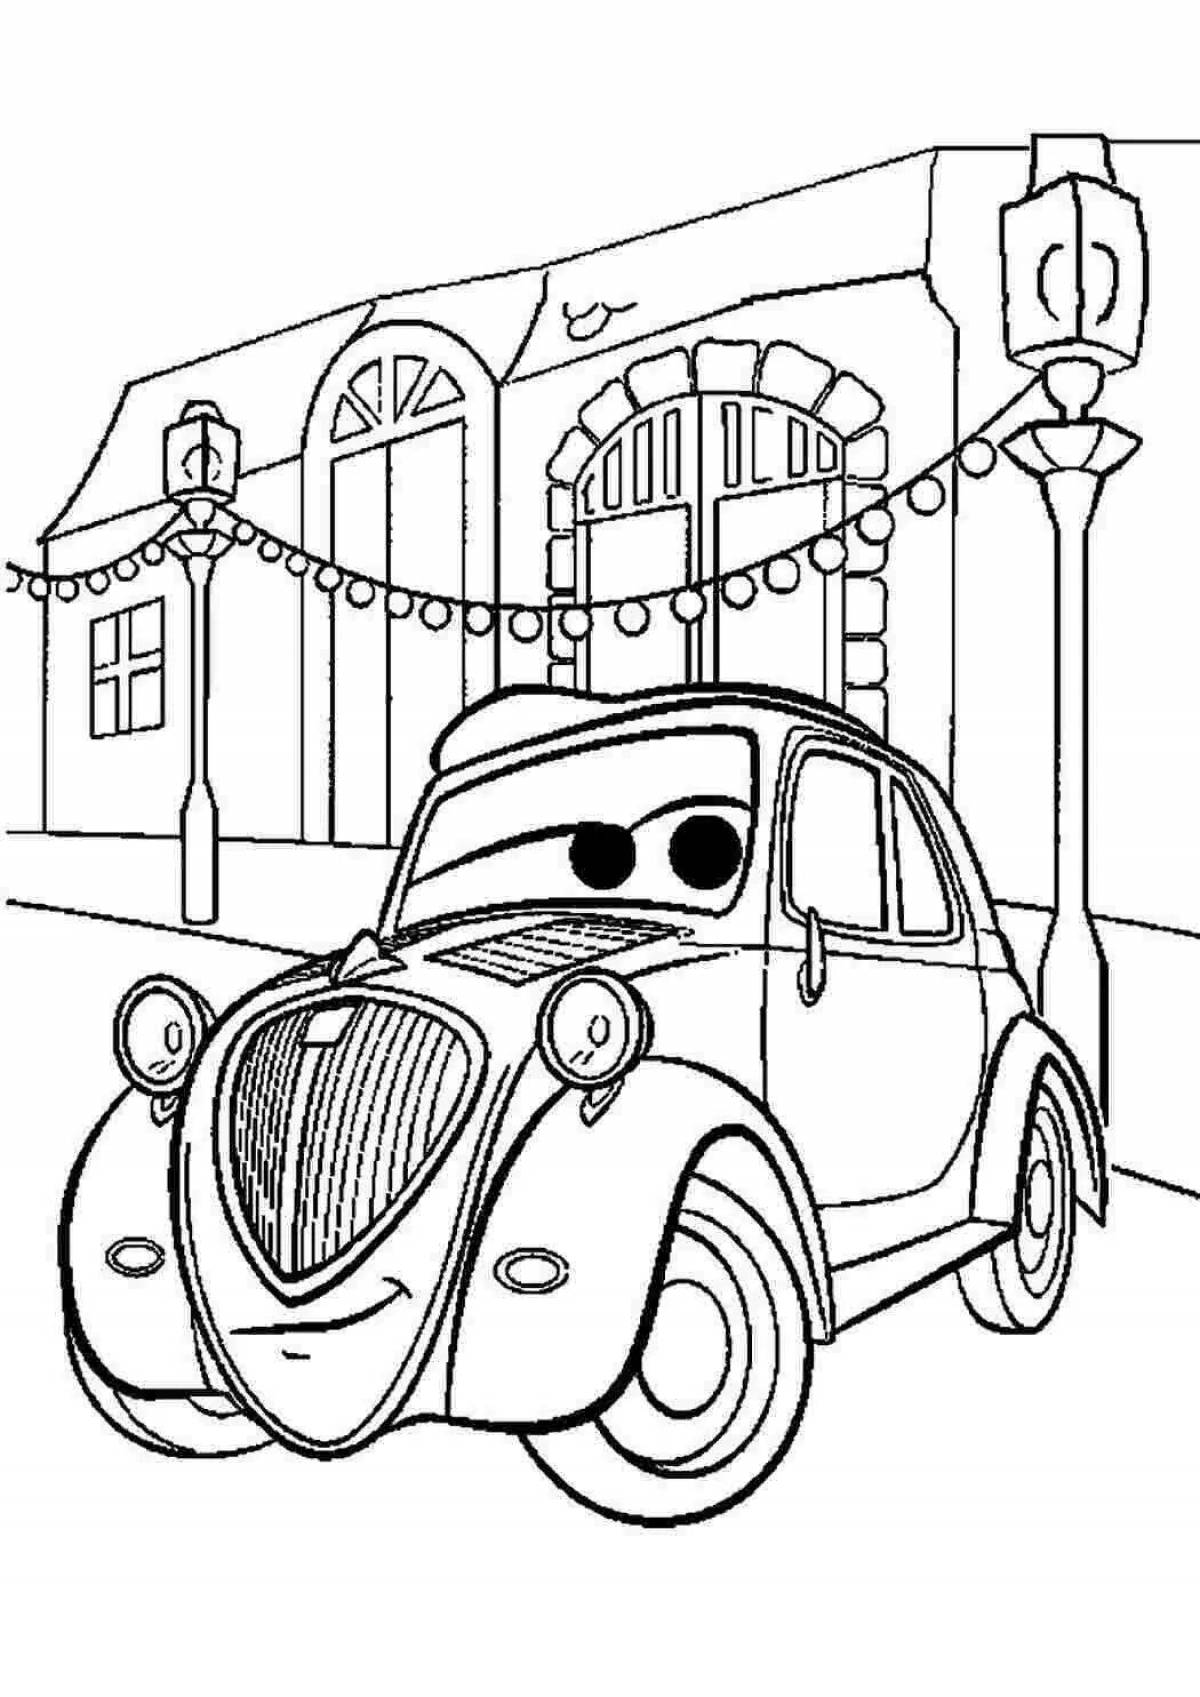 Coloring blatant cars for boys